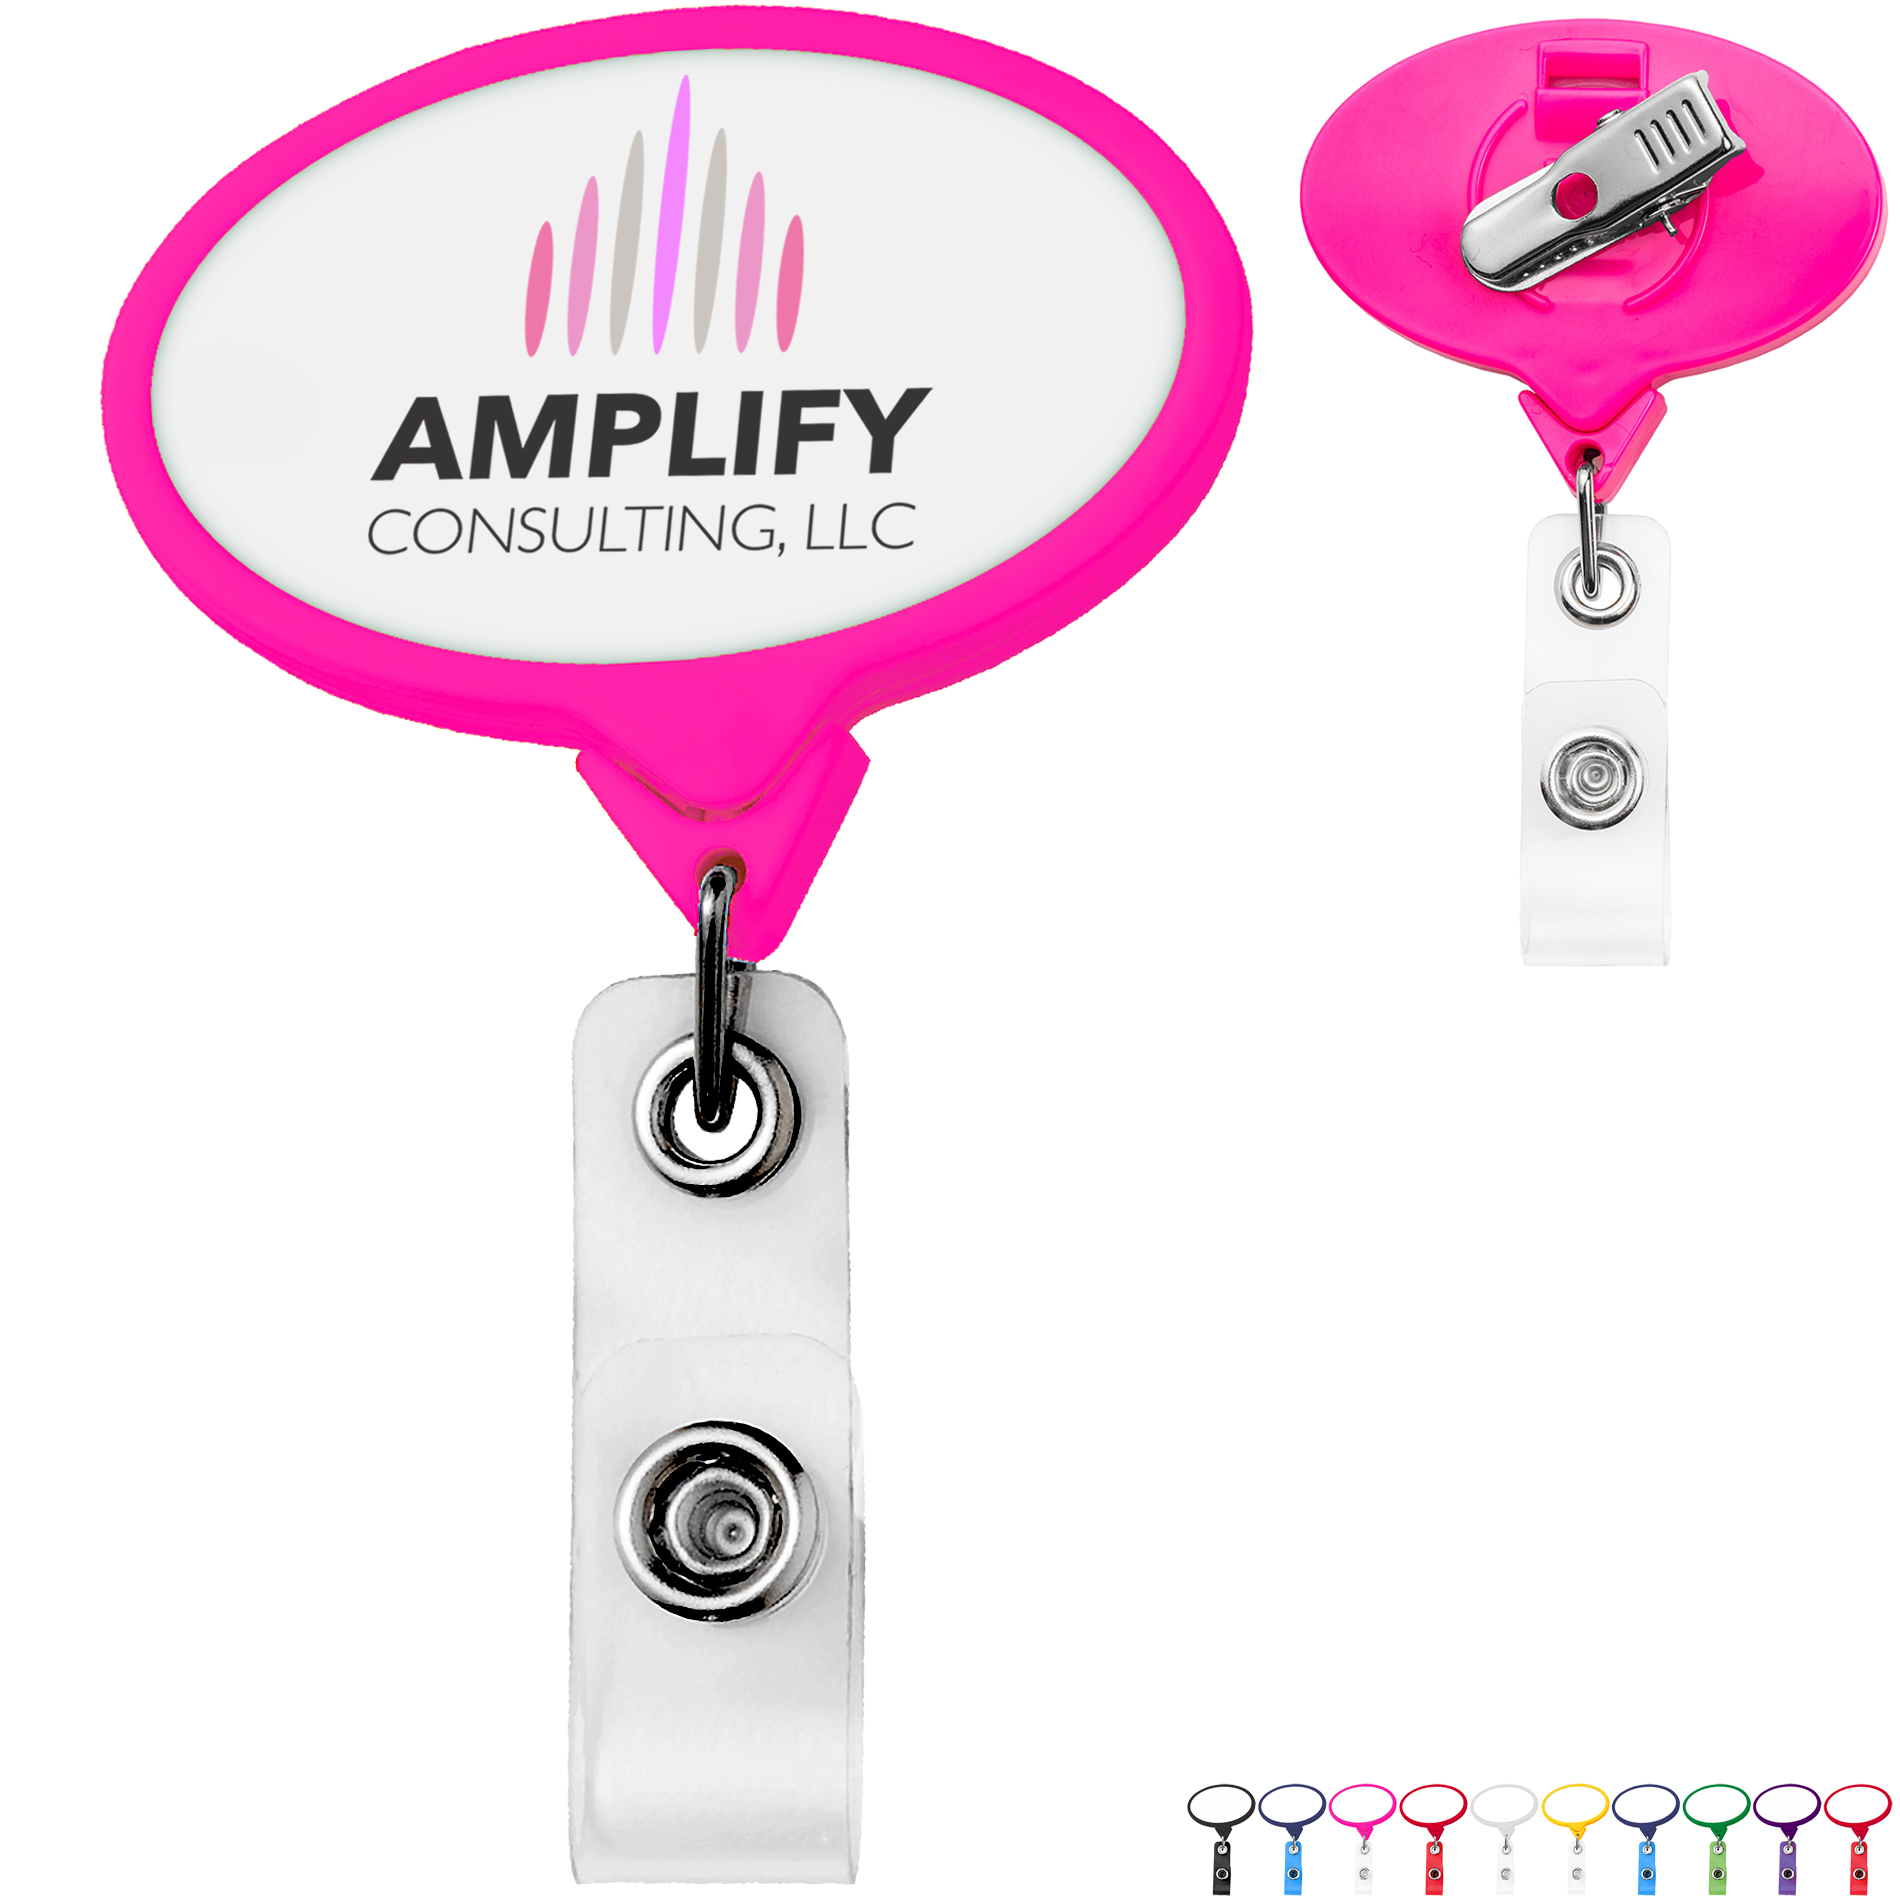 Promotional Lanyards and Badgeholders